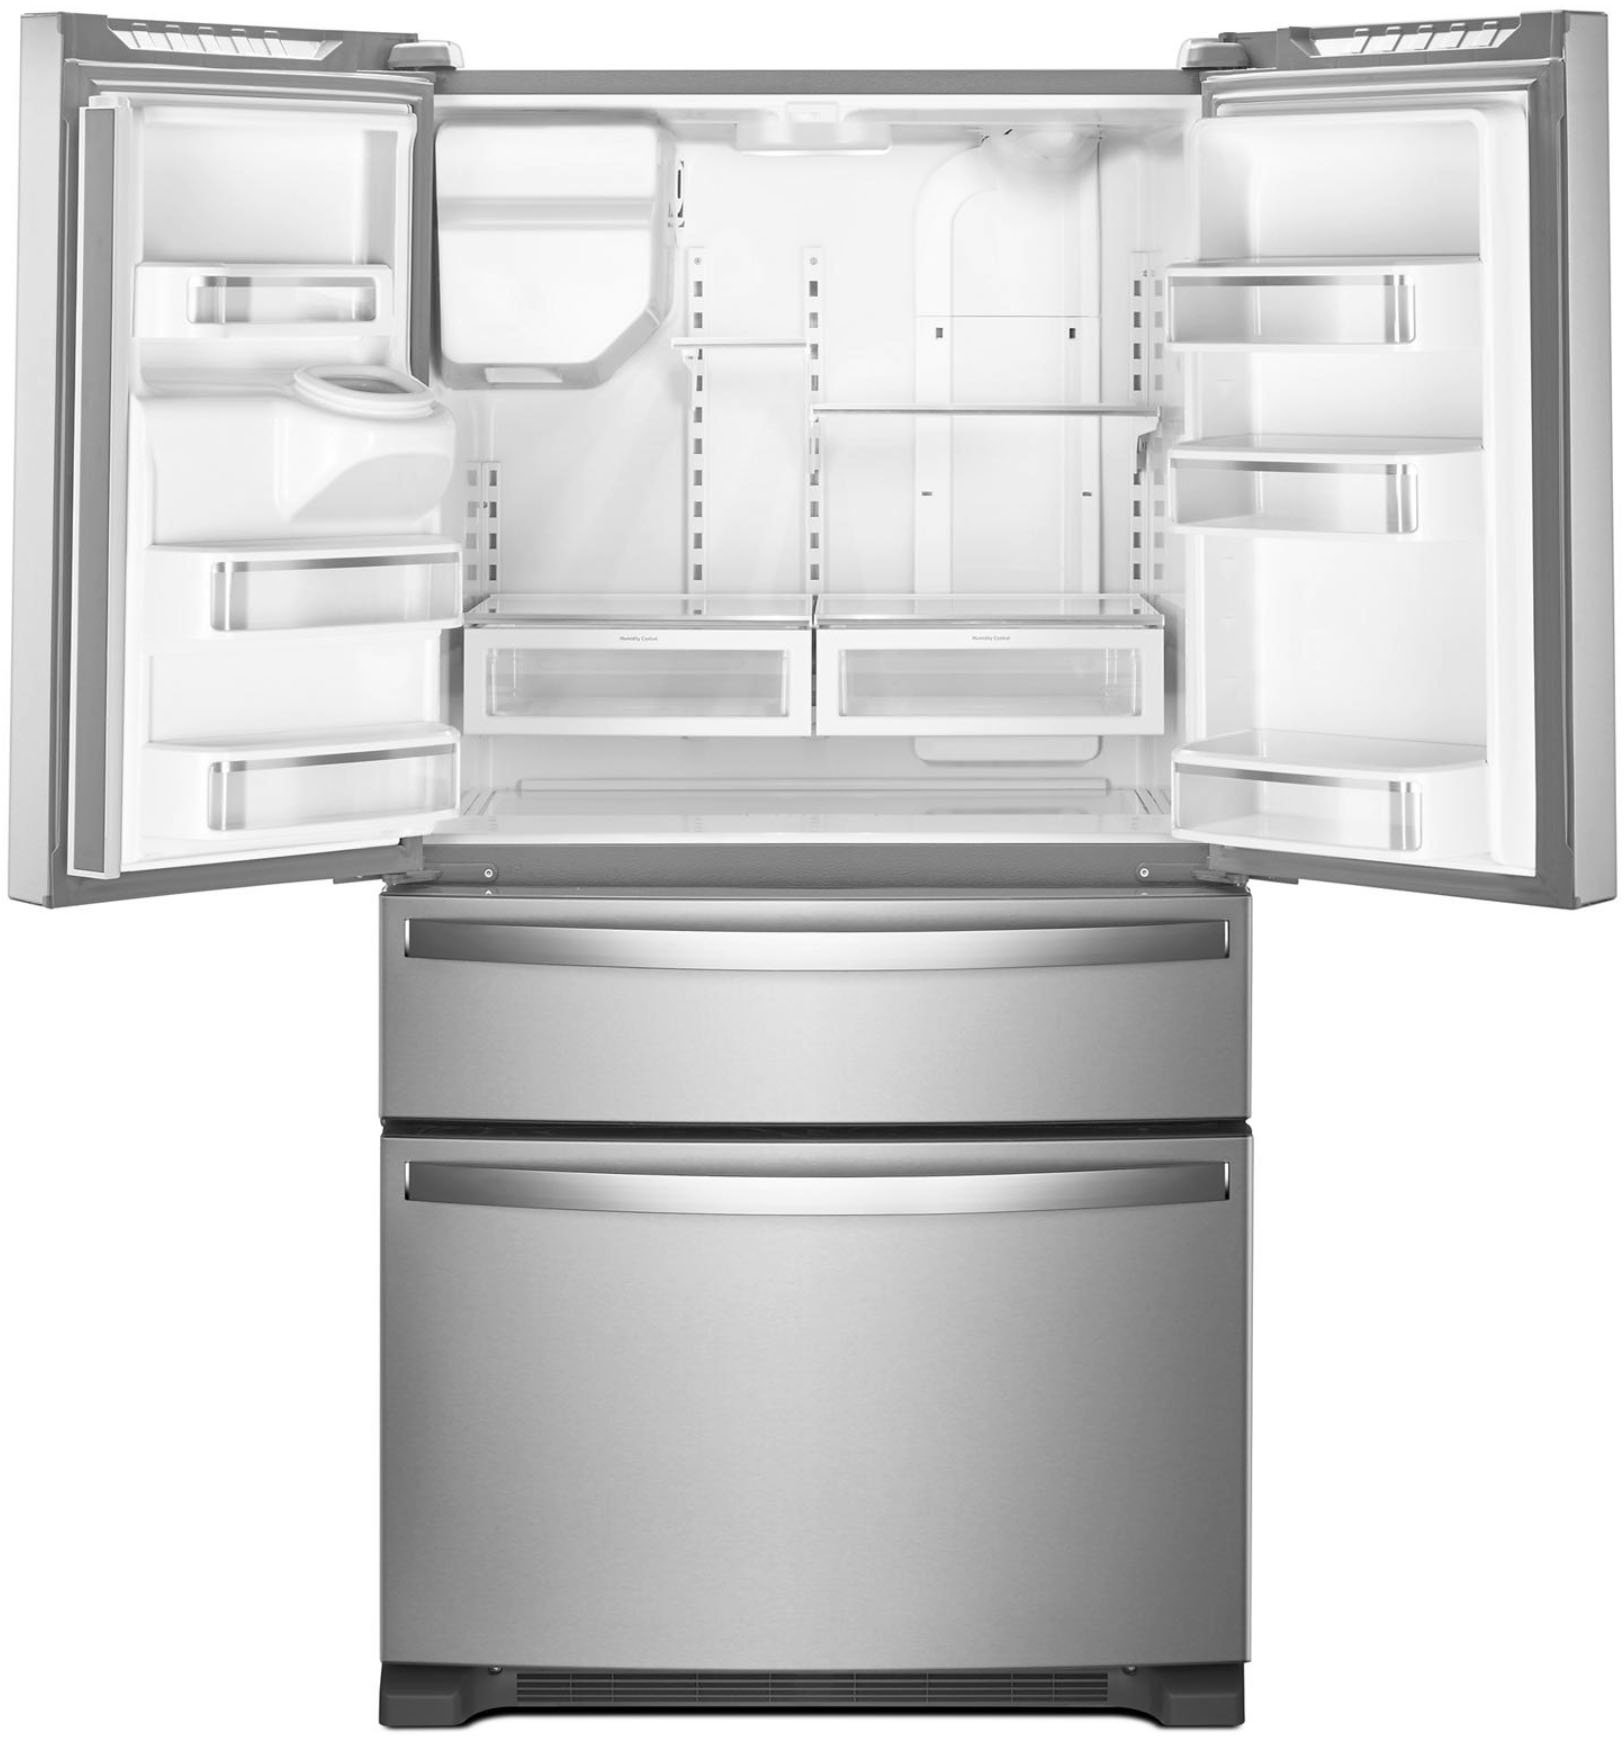 Questions and Answers: Whirlpool 24.5 Cu. Ft. 4-Door French Door ...